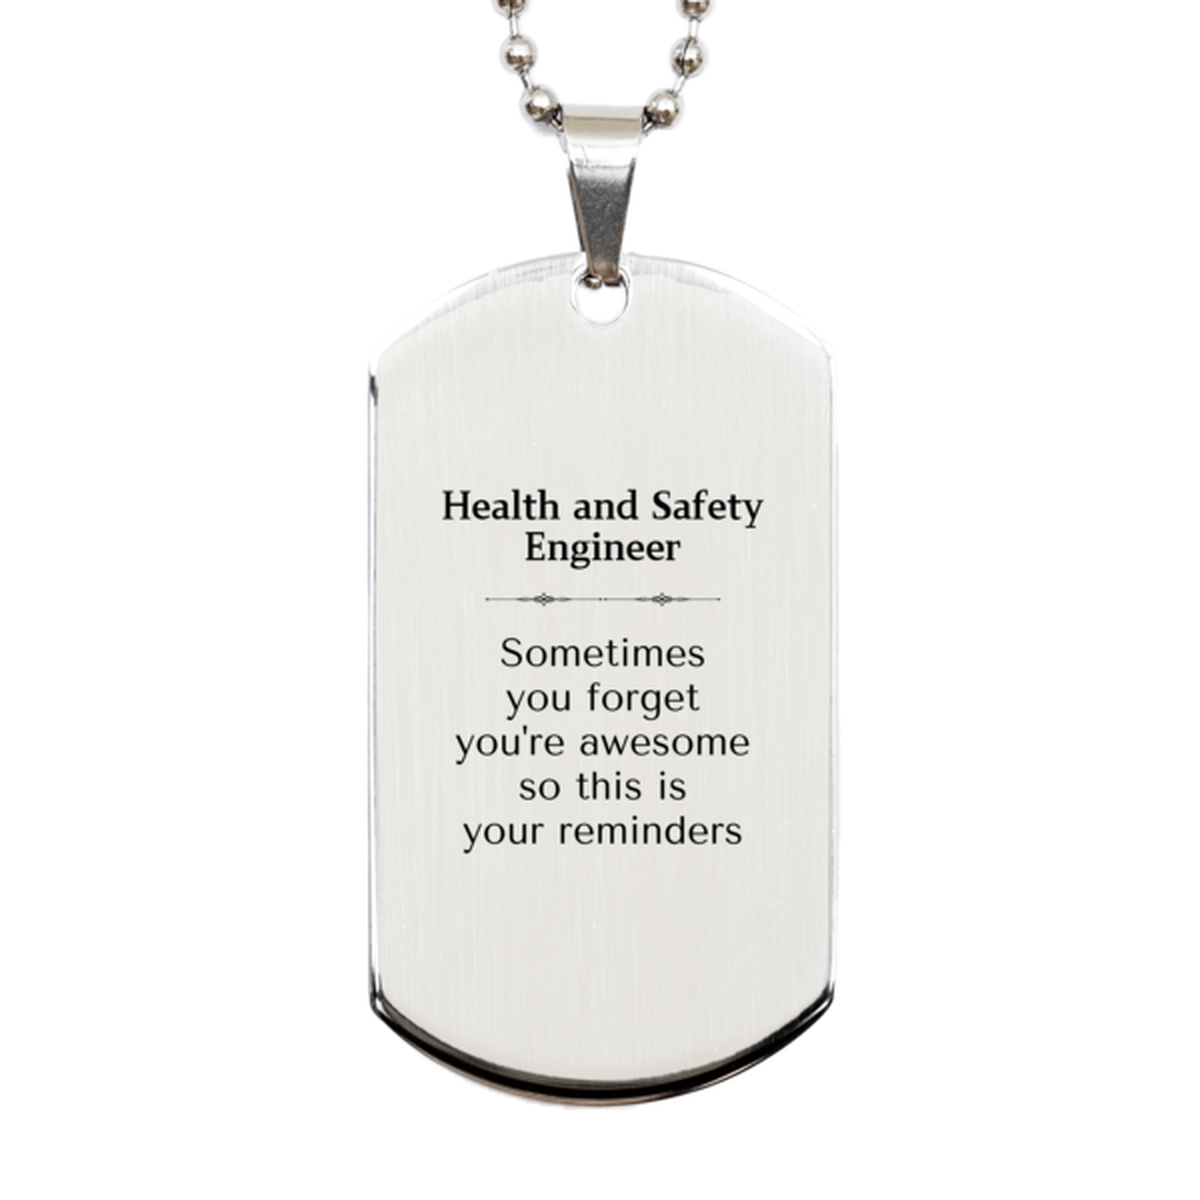 Sentimental Health and Safety Engineer Silver Dog Tag, Health and Safety Engineer Sometimes you forget you're awesome so this is your reminders, Graduation Christmas Birthday Gifts for Health and Safety Engineer, Men, Women, Coworkers